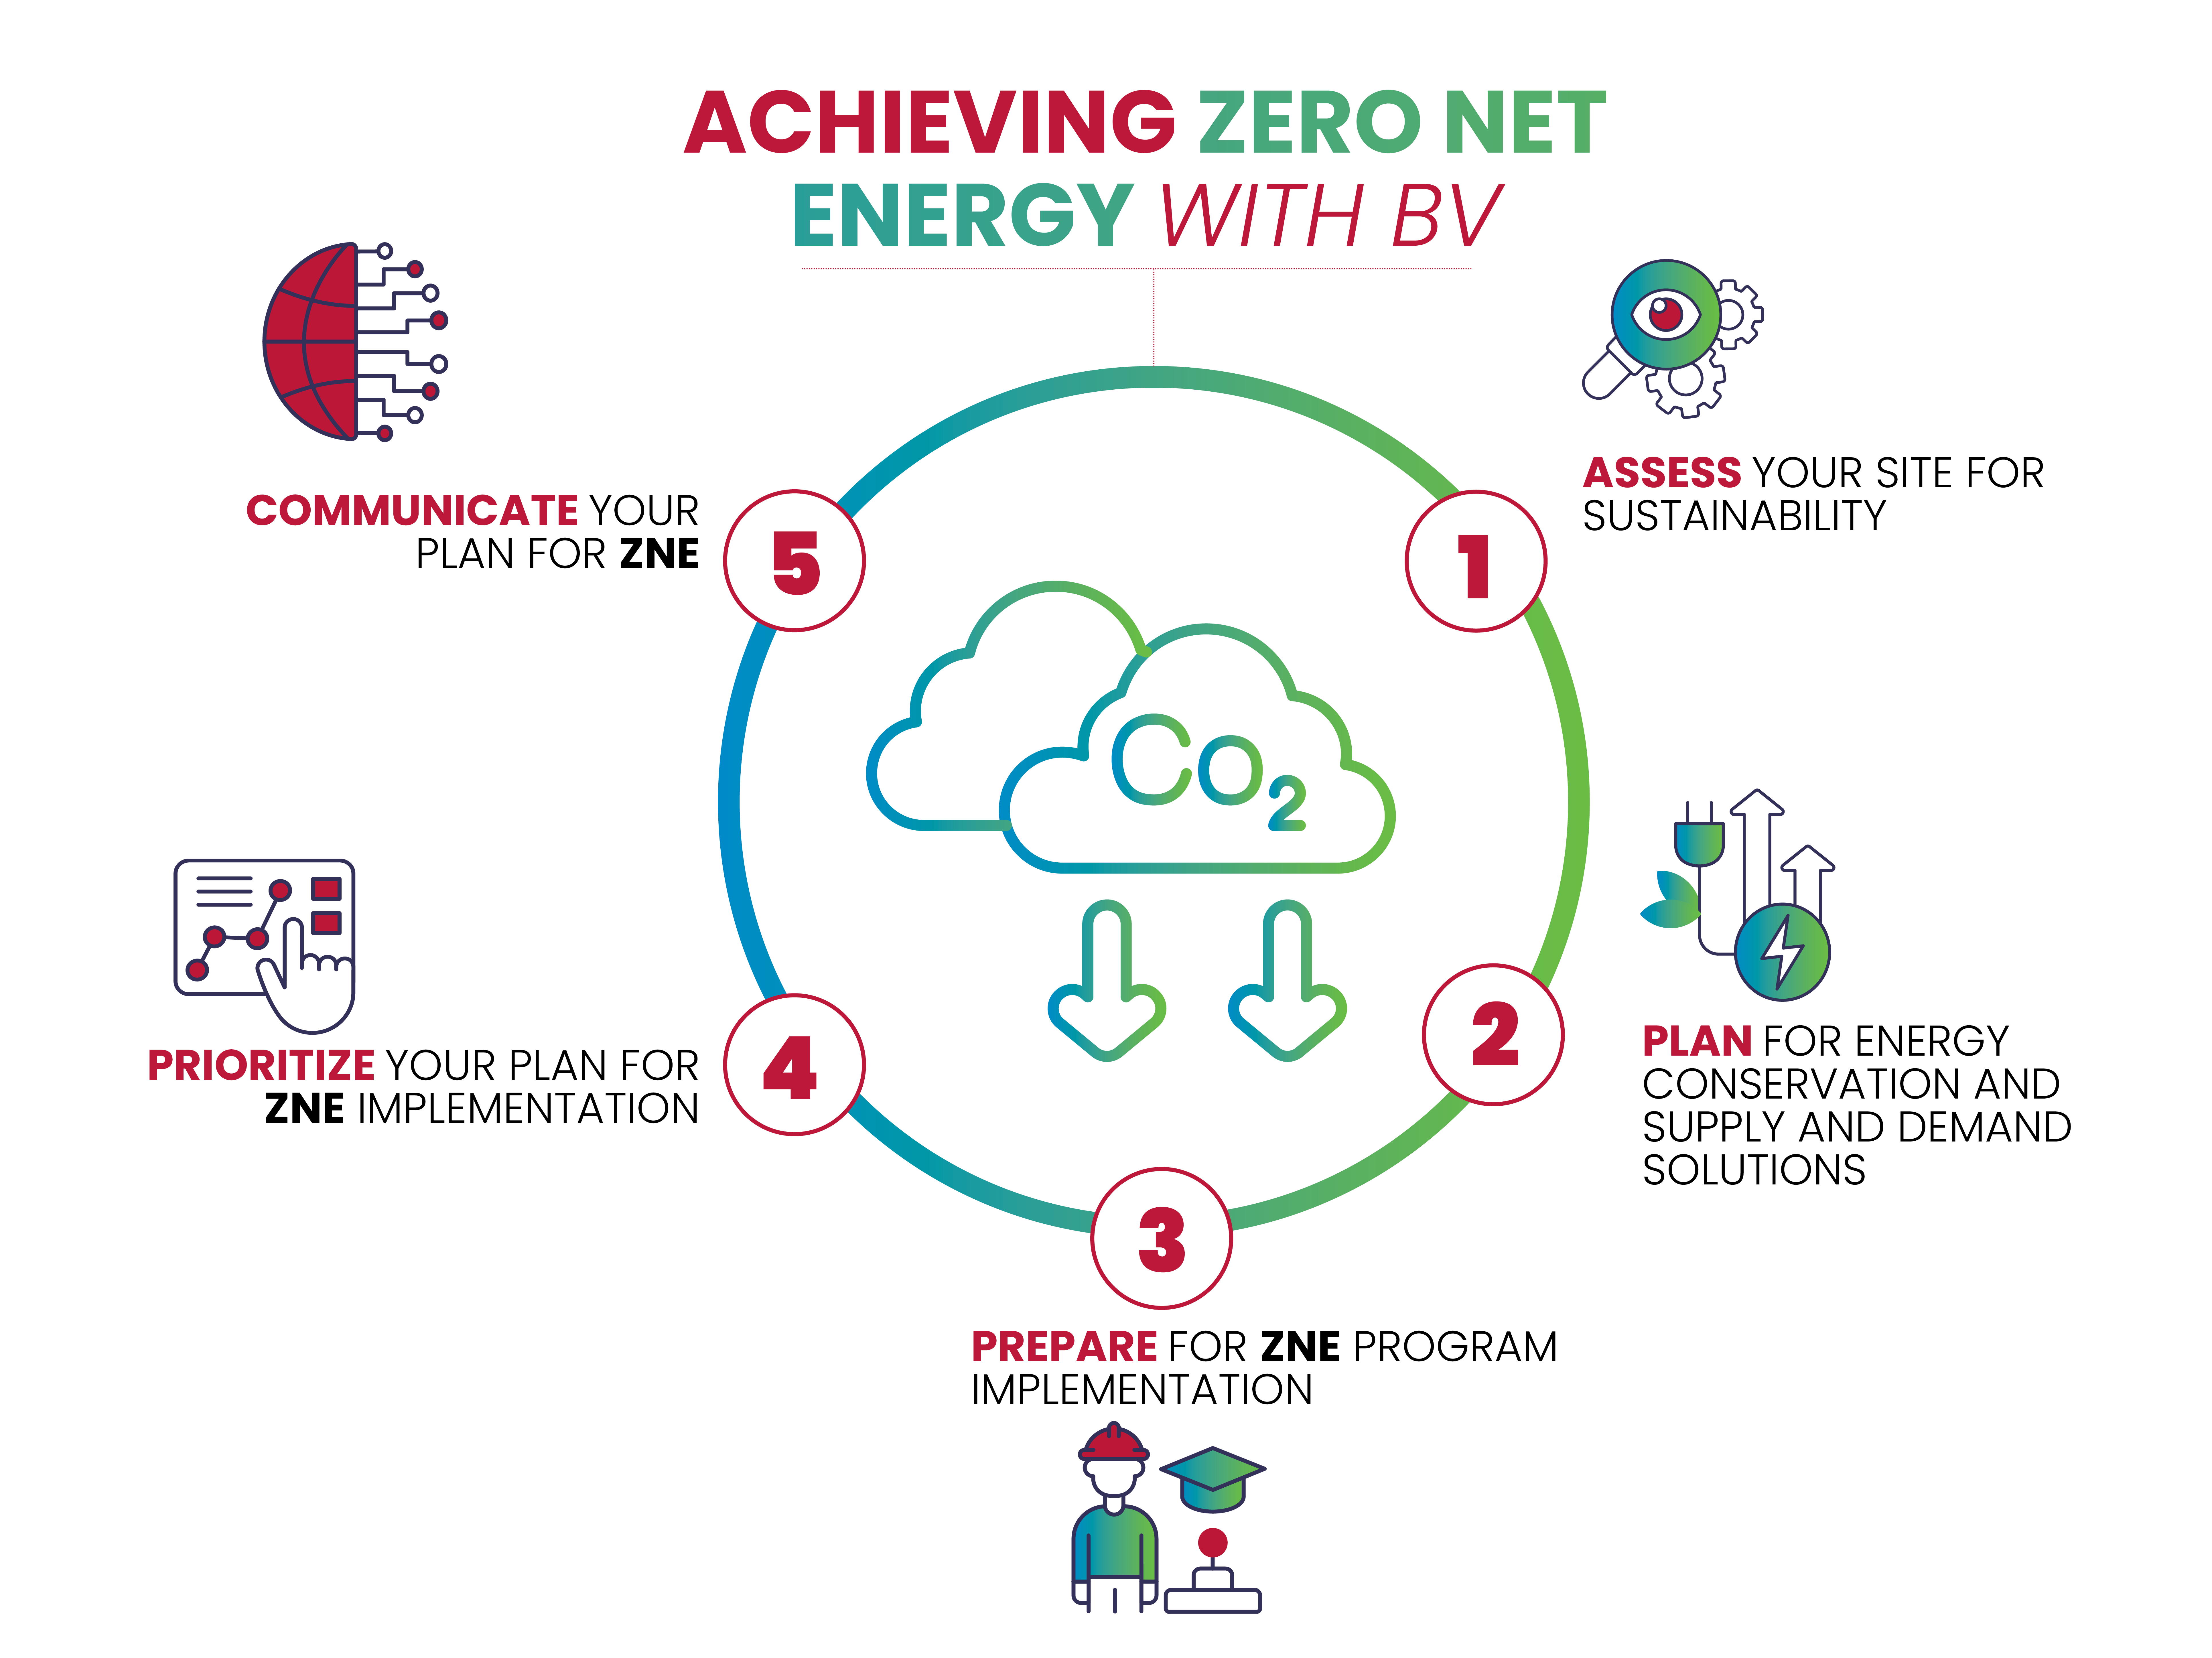 WHAT DOES IT TAKE TO GET TO ZERO NET ENERGY? 